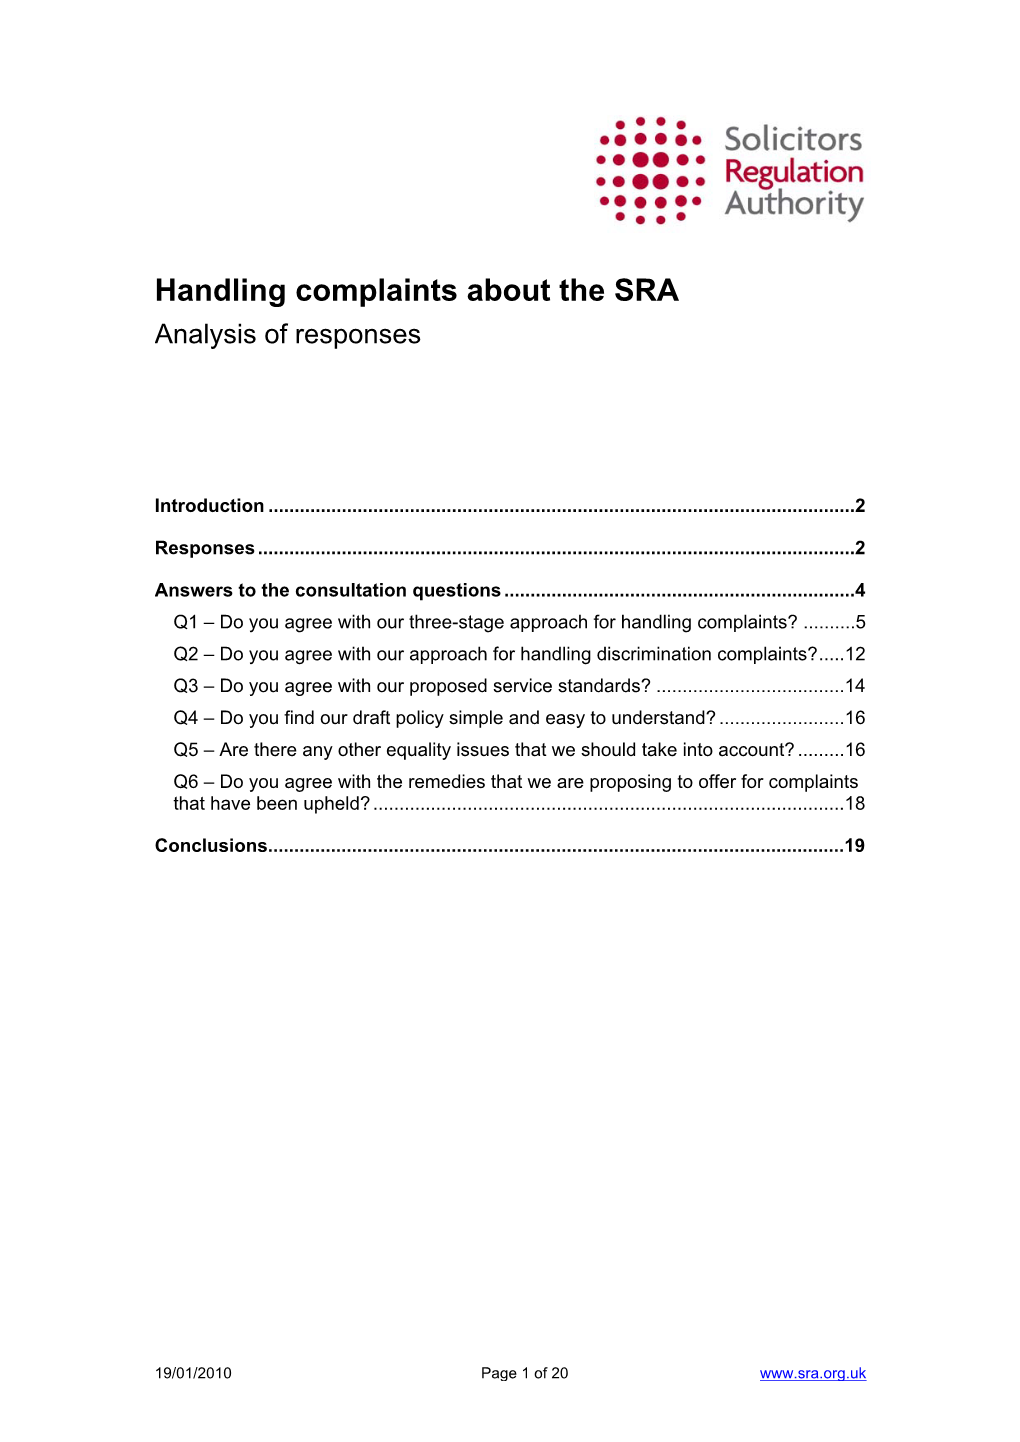 Handling Complaints About the SRA Analysis of Responses